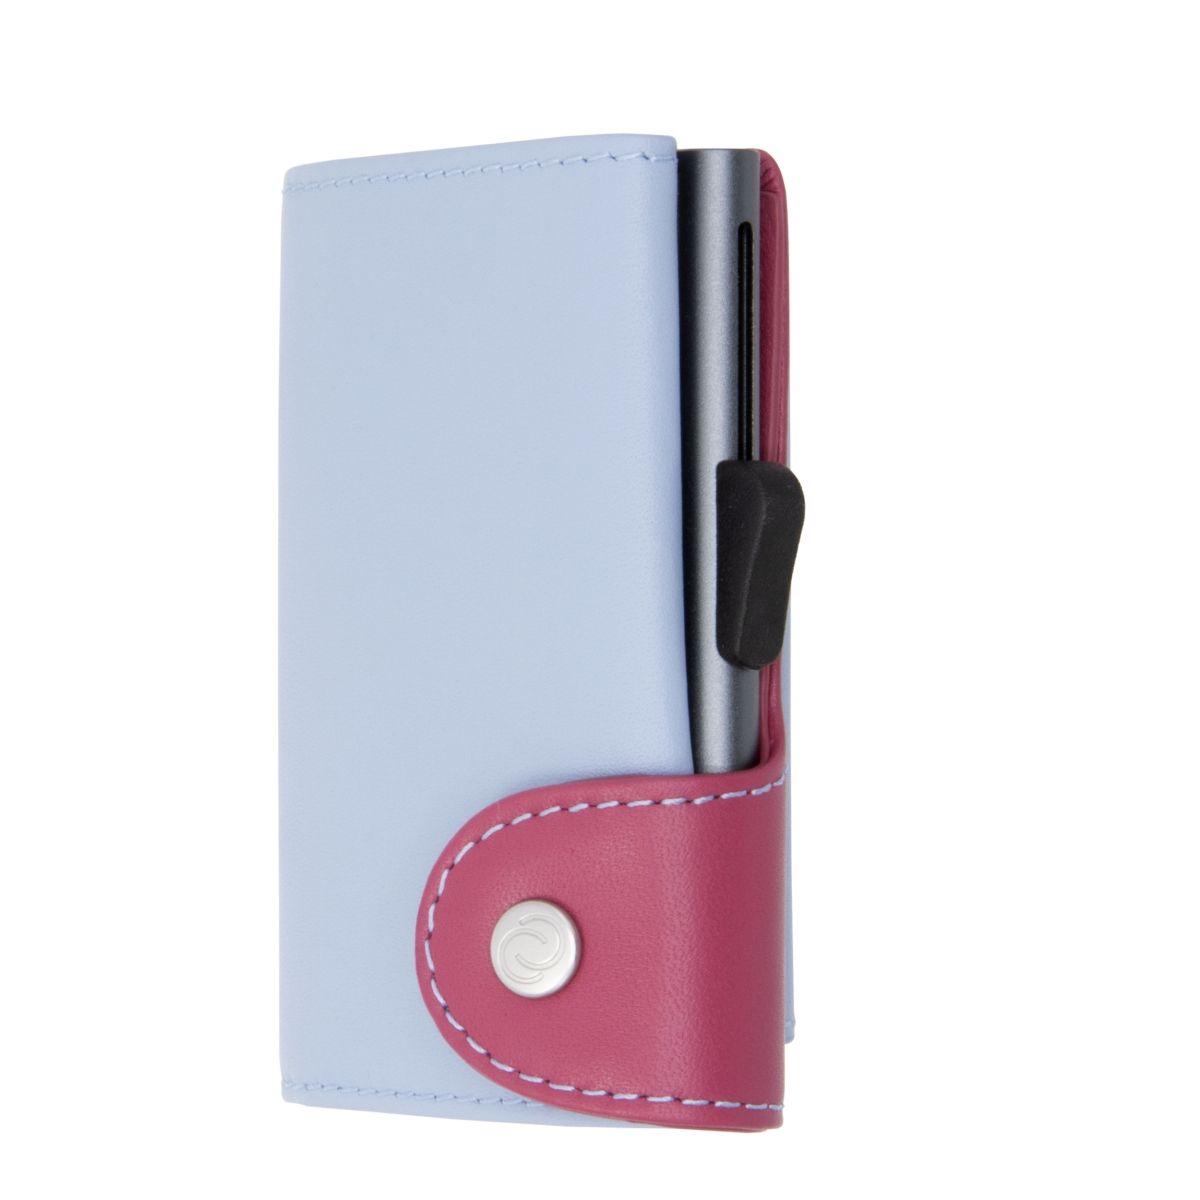 C-Secure Aluminum Card Holder with Genuine Leather and Coin Pouch - Ice/Cherry